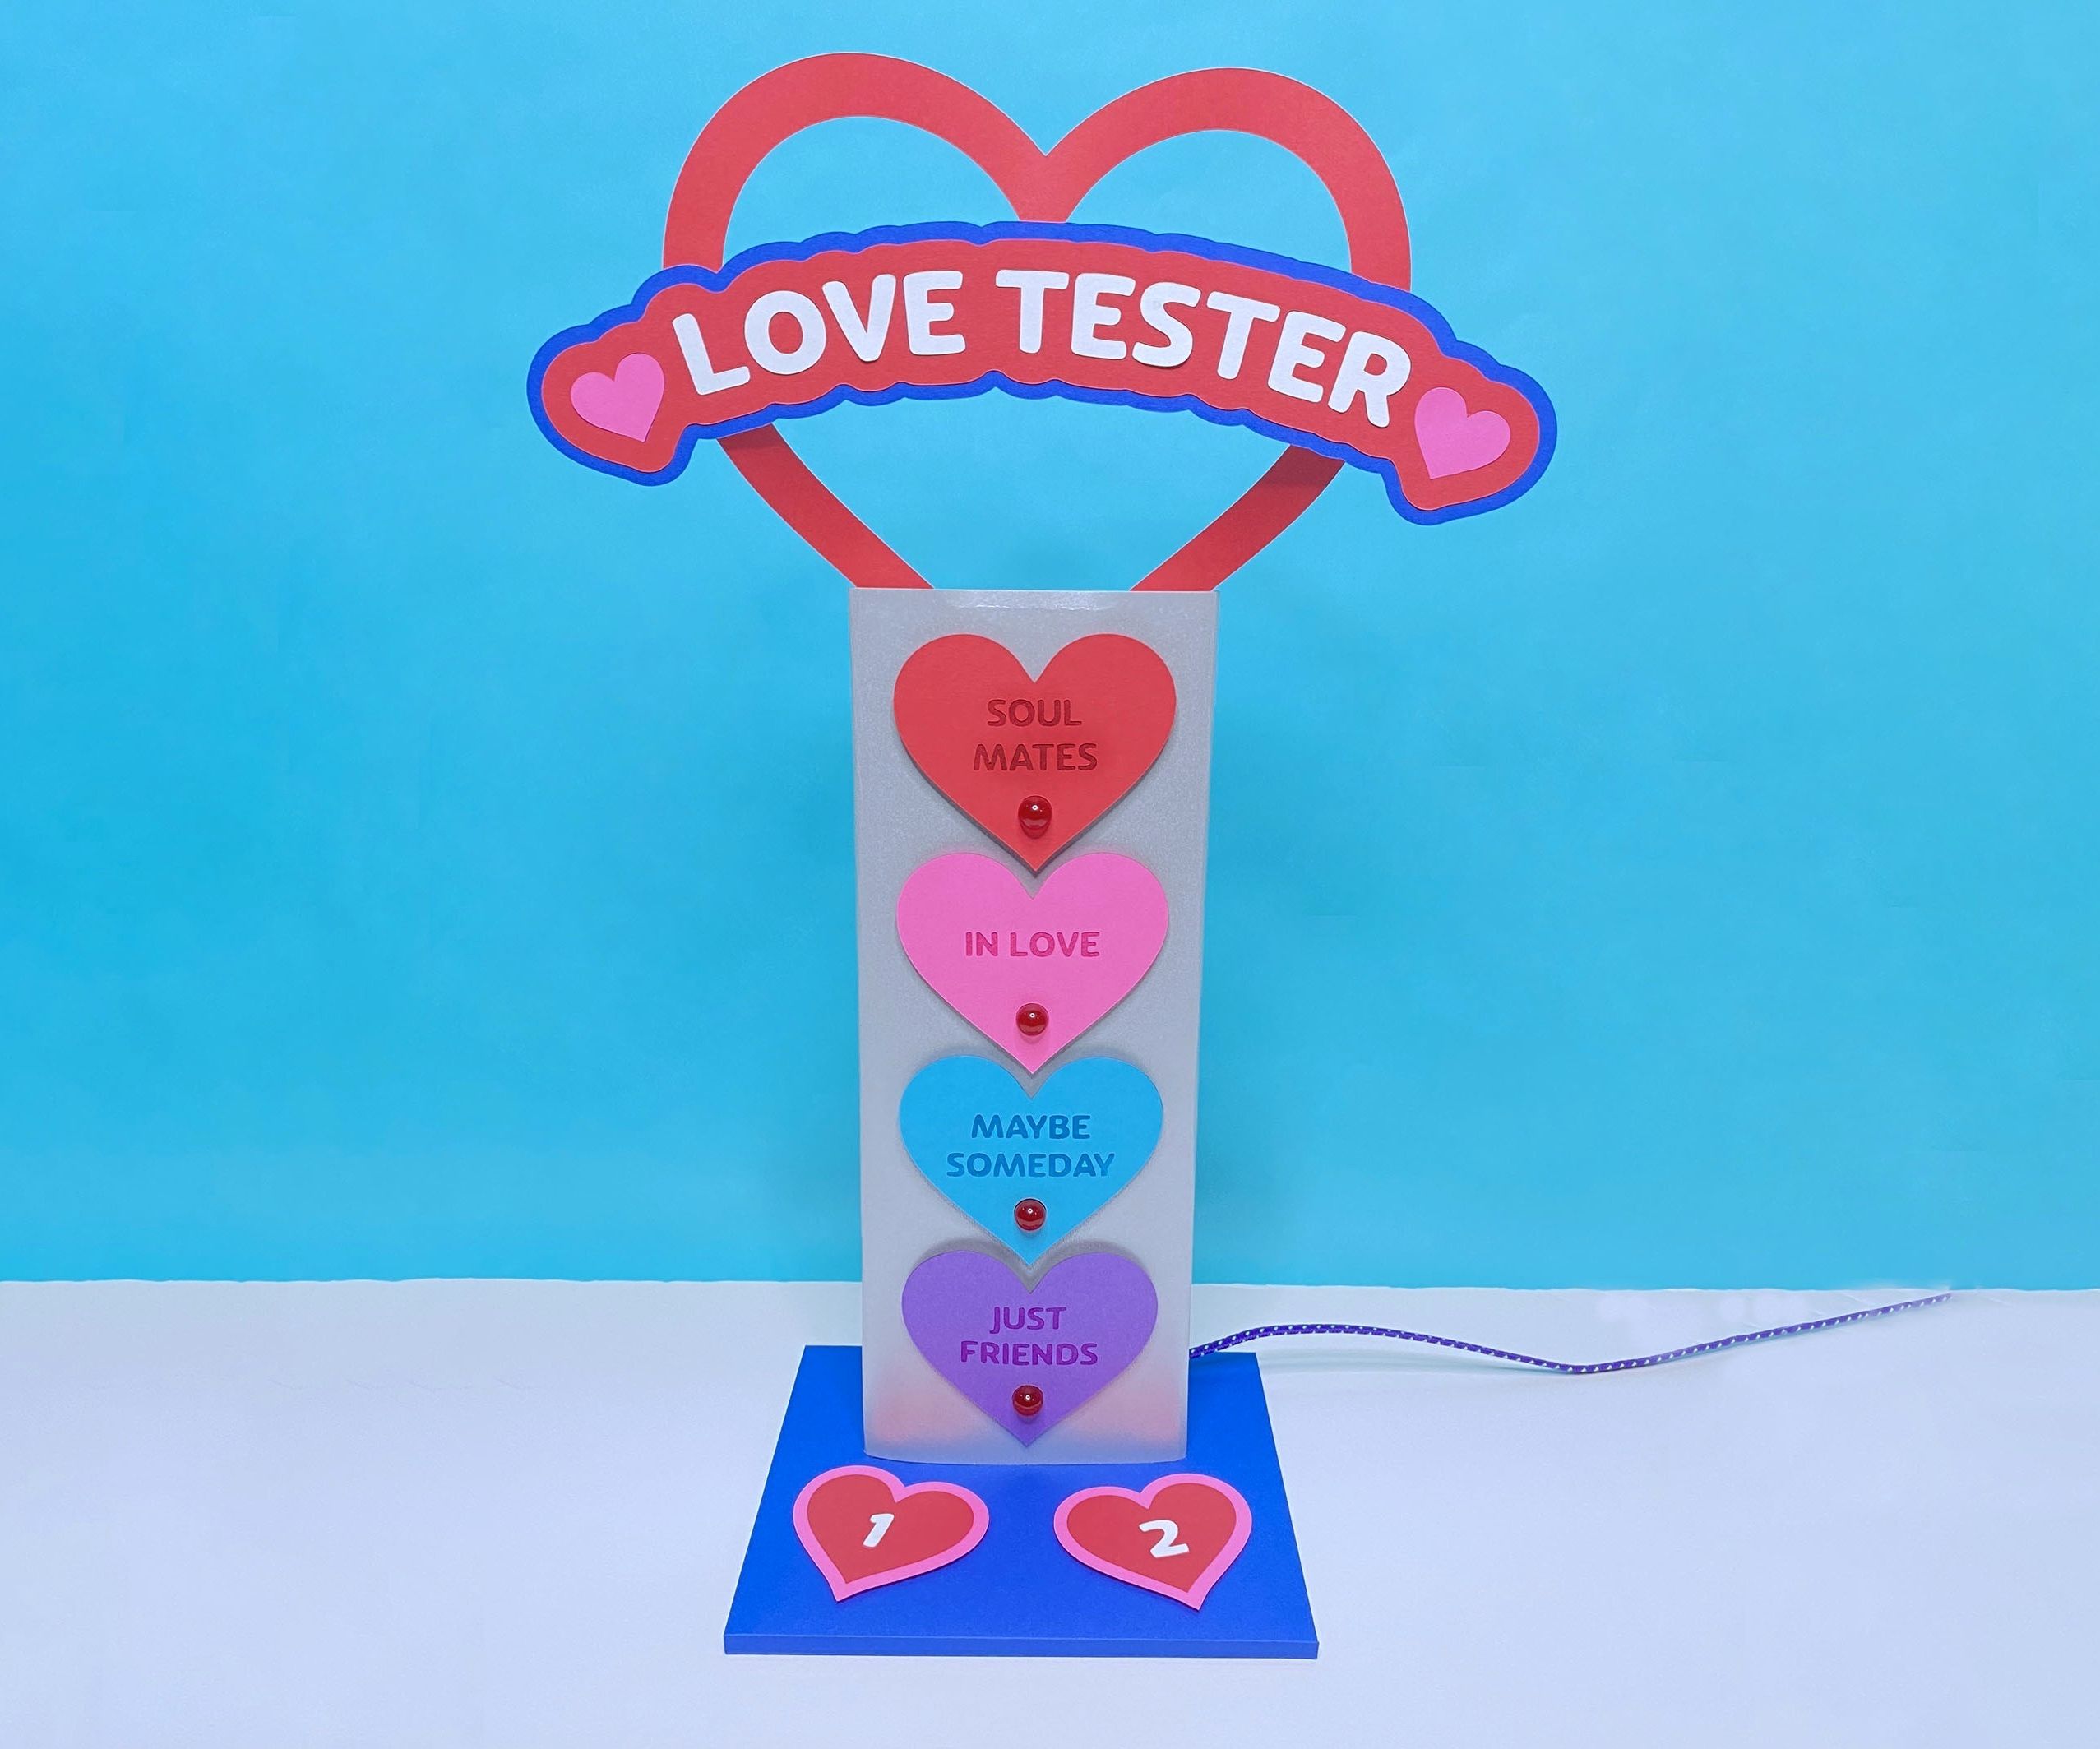 The Love Tester